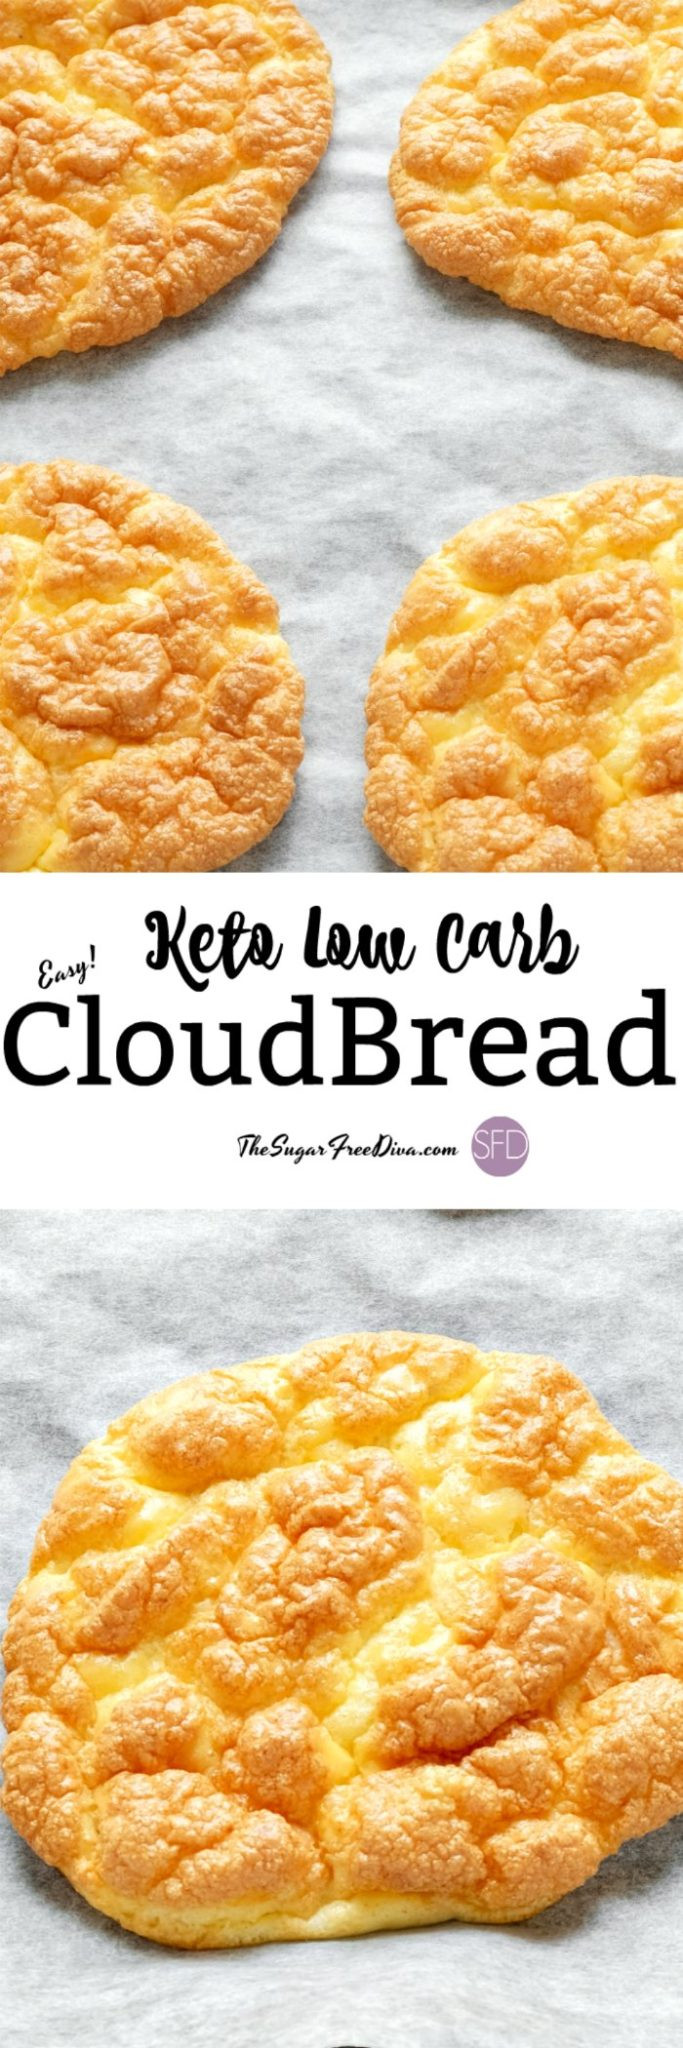 Keto Cloud Bread Easy
 Check out this recipe for Sugar Free and Keto Cloud Bread